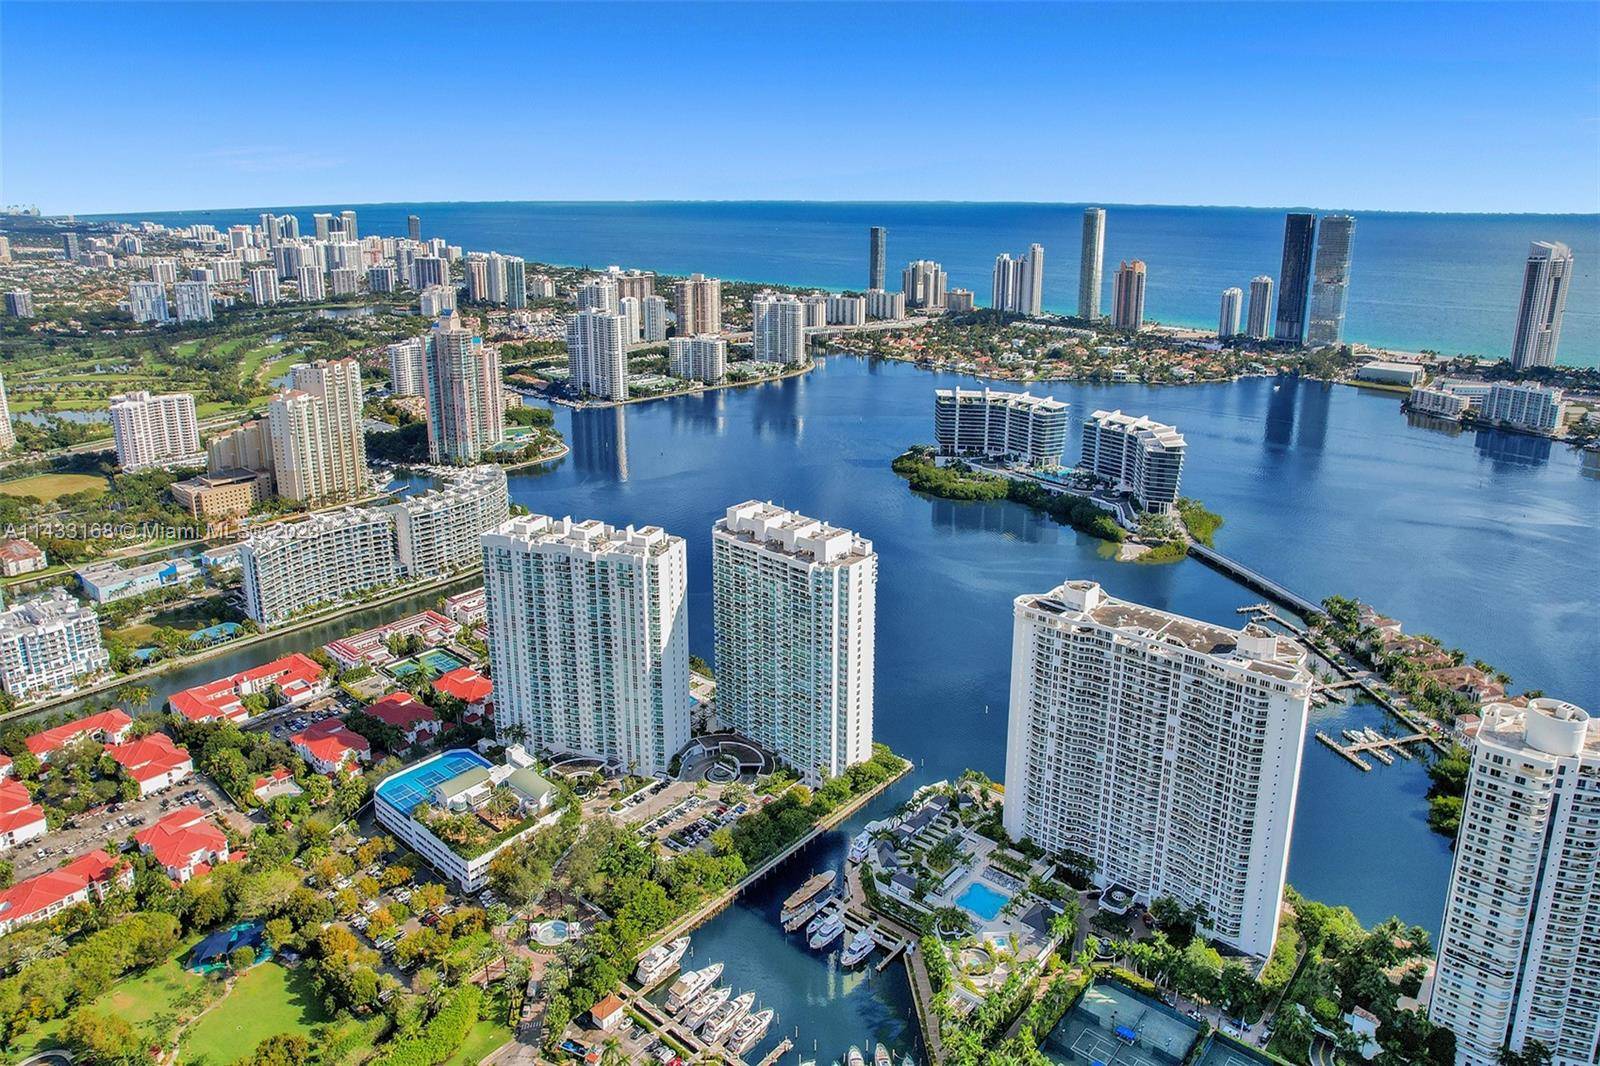 Come live at the best community in Aventura.